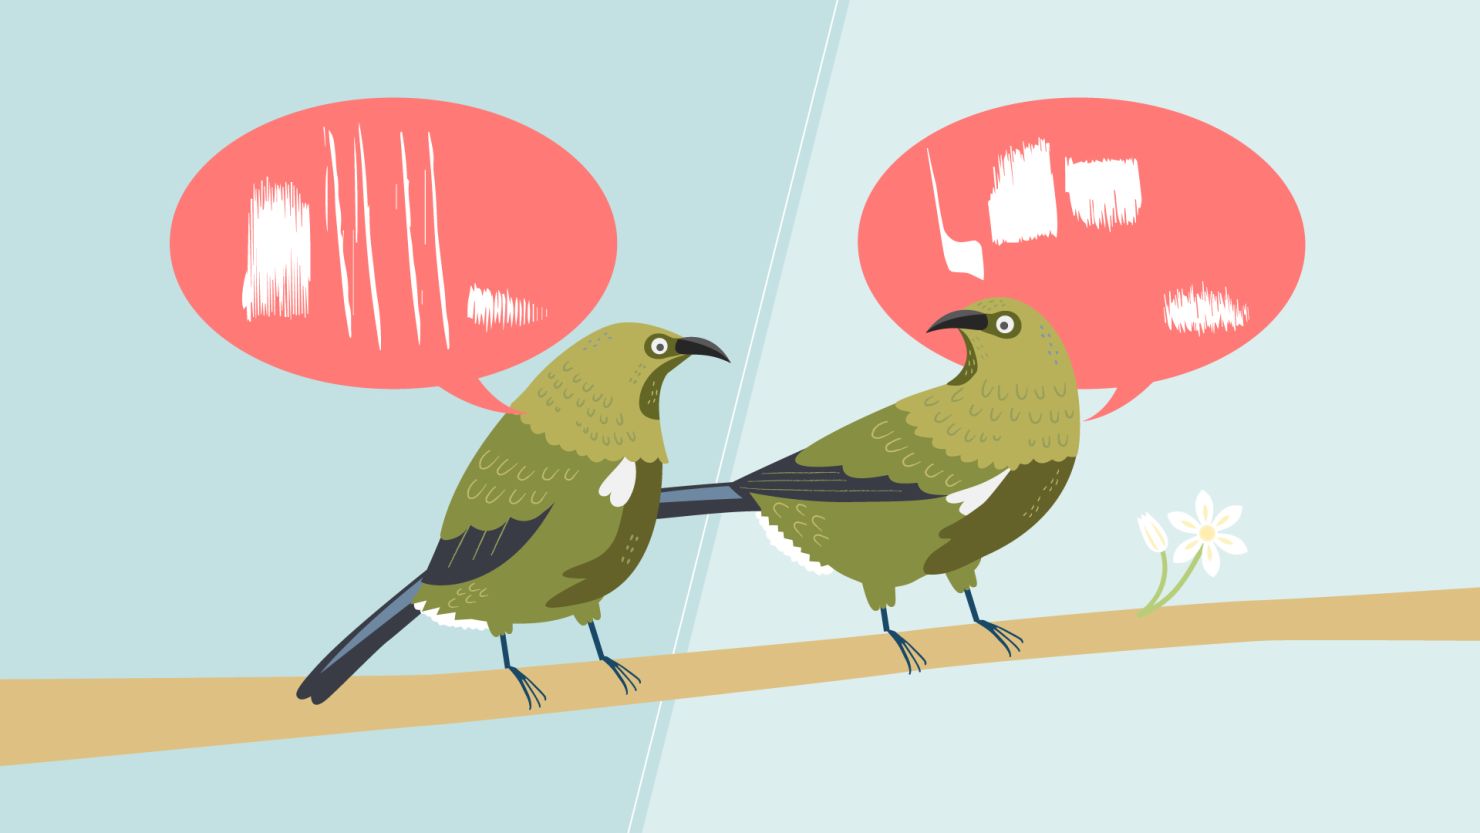 Birds aren't all singing the same song. They have dialects, too